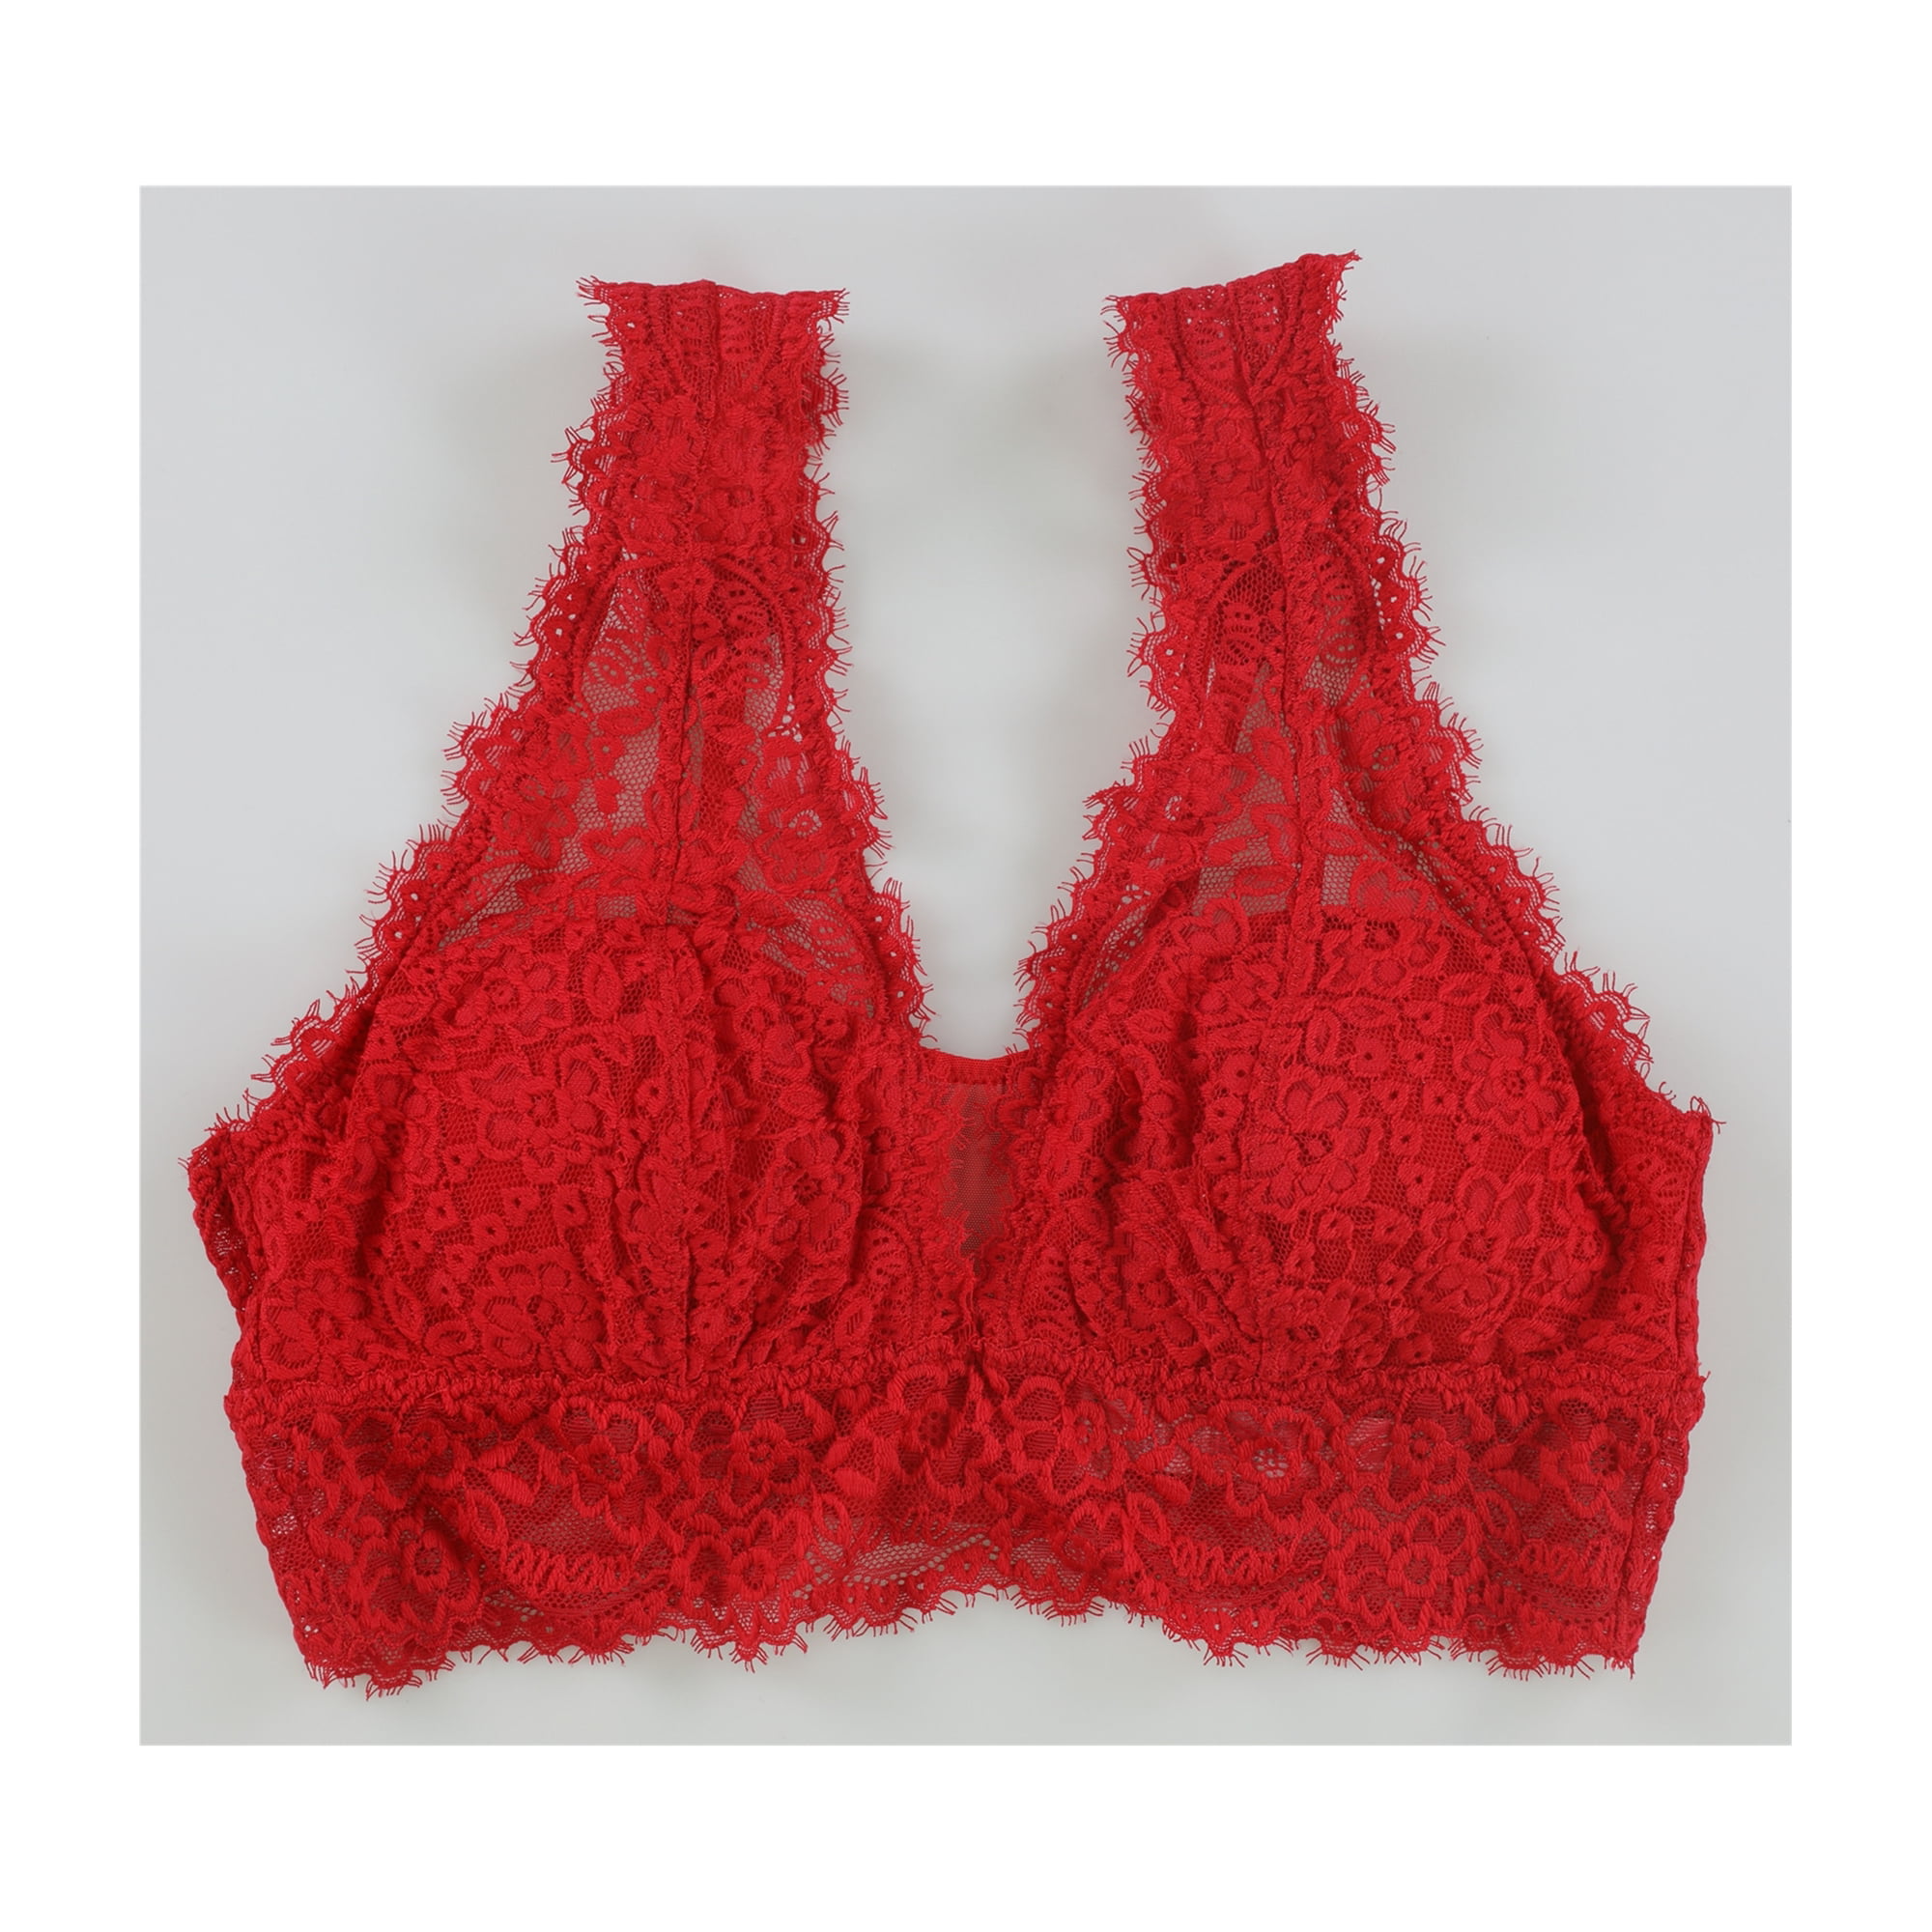 American Eagle Womens Floral Lace Balconette Bra, Red, Small 